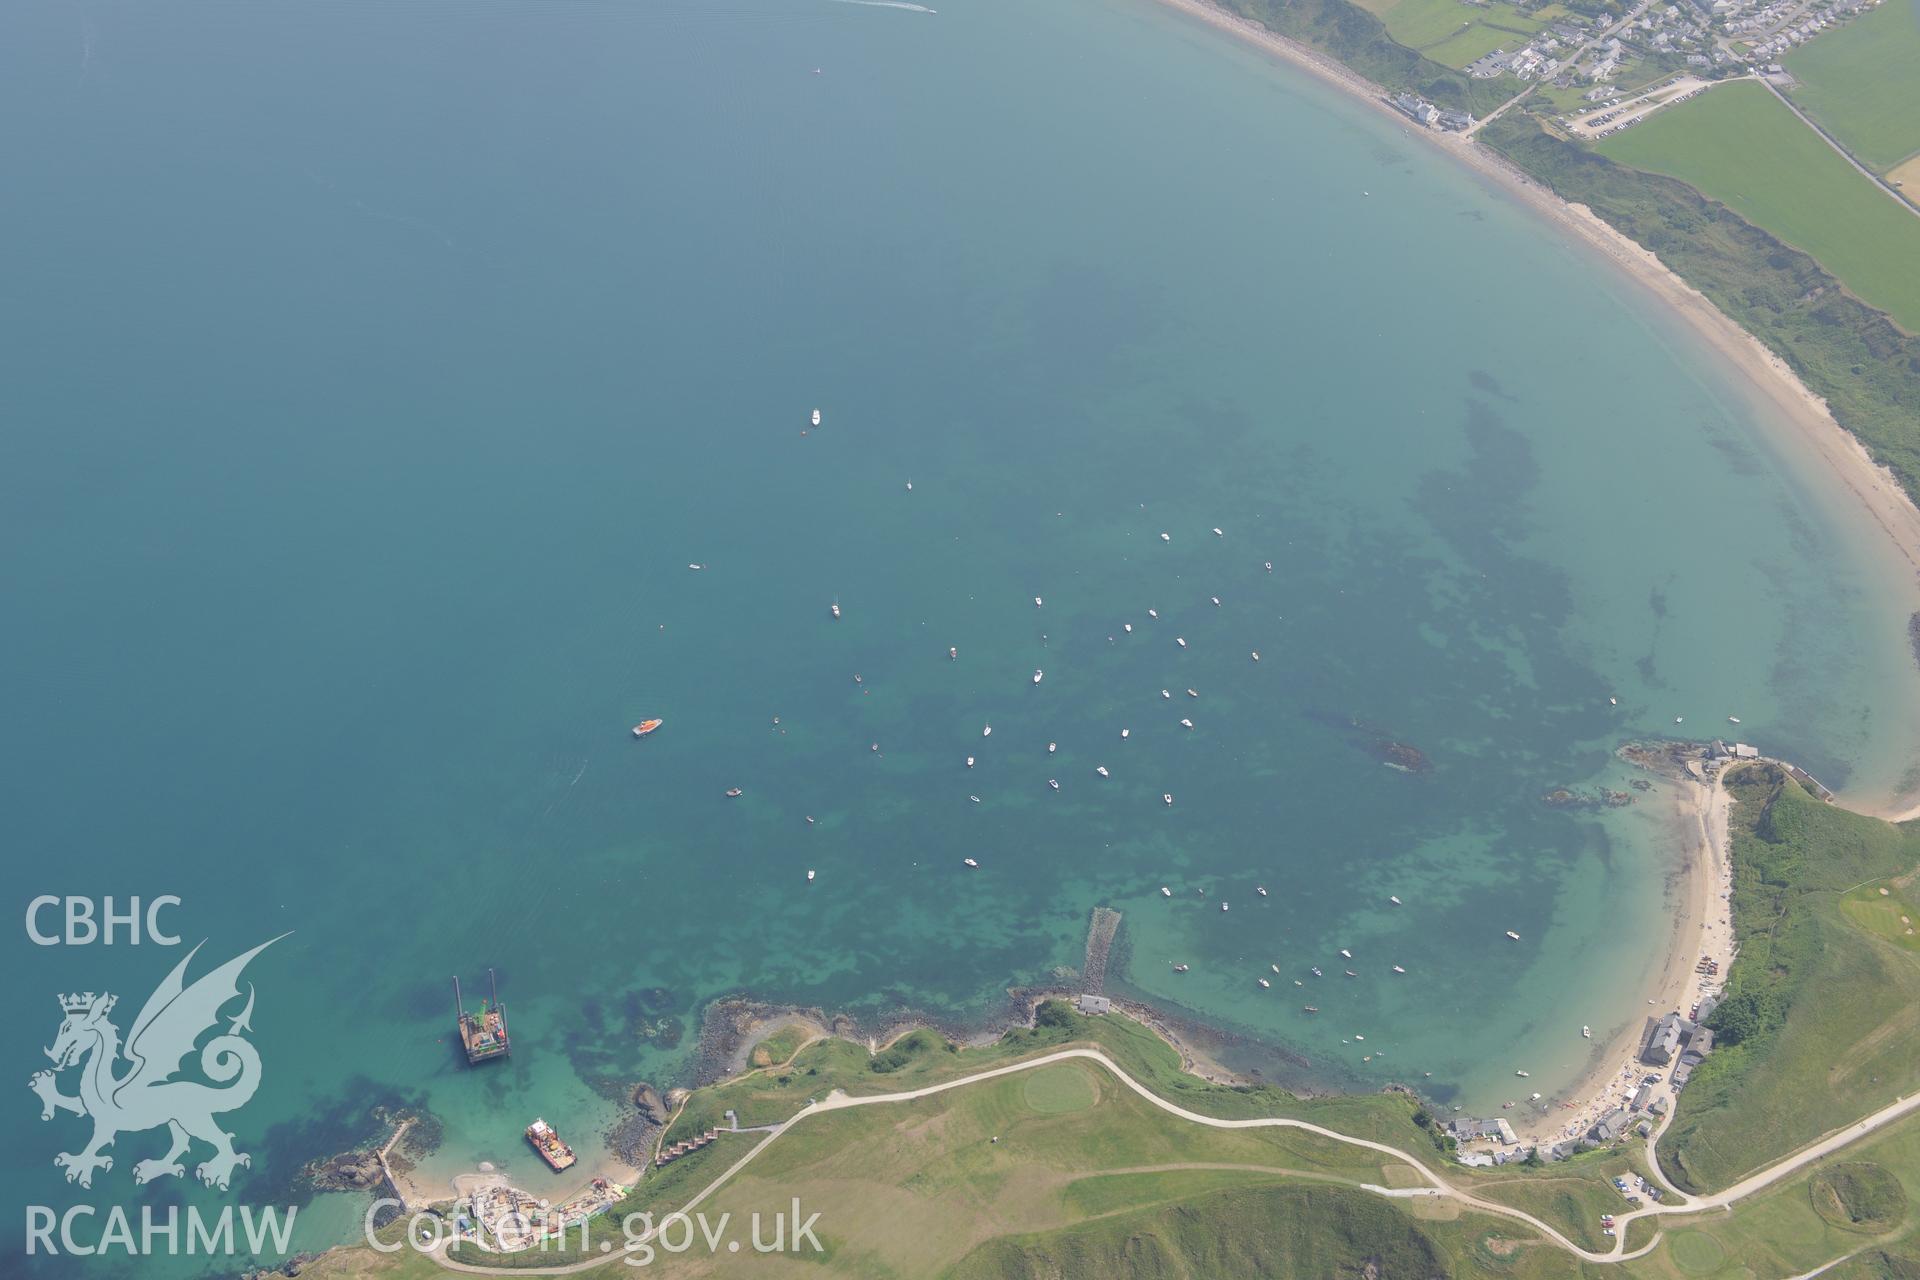 Lifeboat House, Lighthouse, Old Pier and Trwyn Porth Dinllaen Promontory Enclosure, and Porth Dinllaen & Morfa Nefyn villages. Oblique aerial photograph taken during RCAHMW?s programme of archaeological aerial reconnaissance by Toby Driver, 12th July 2013.